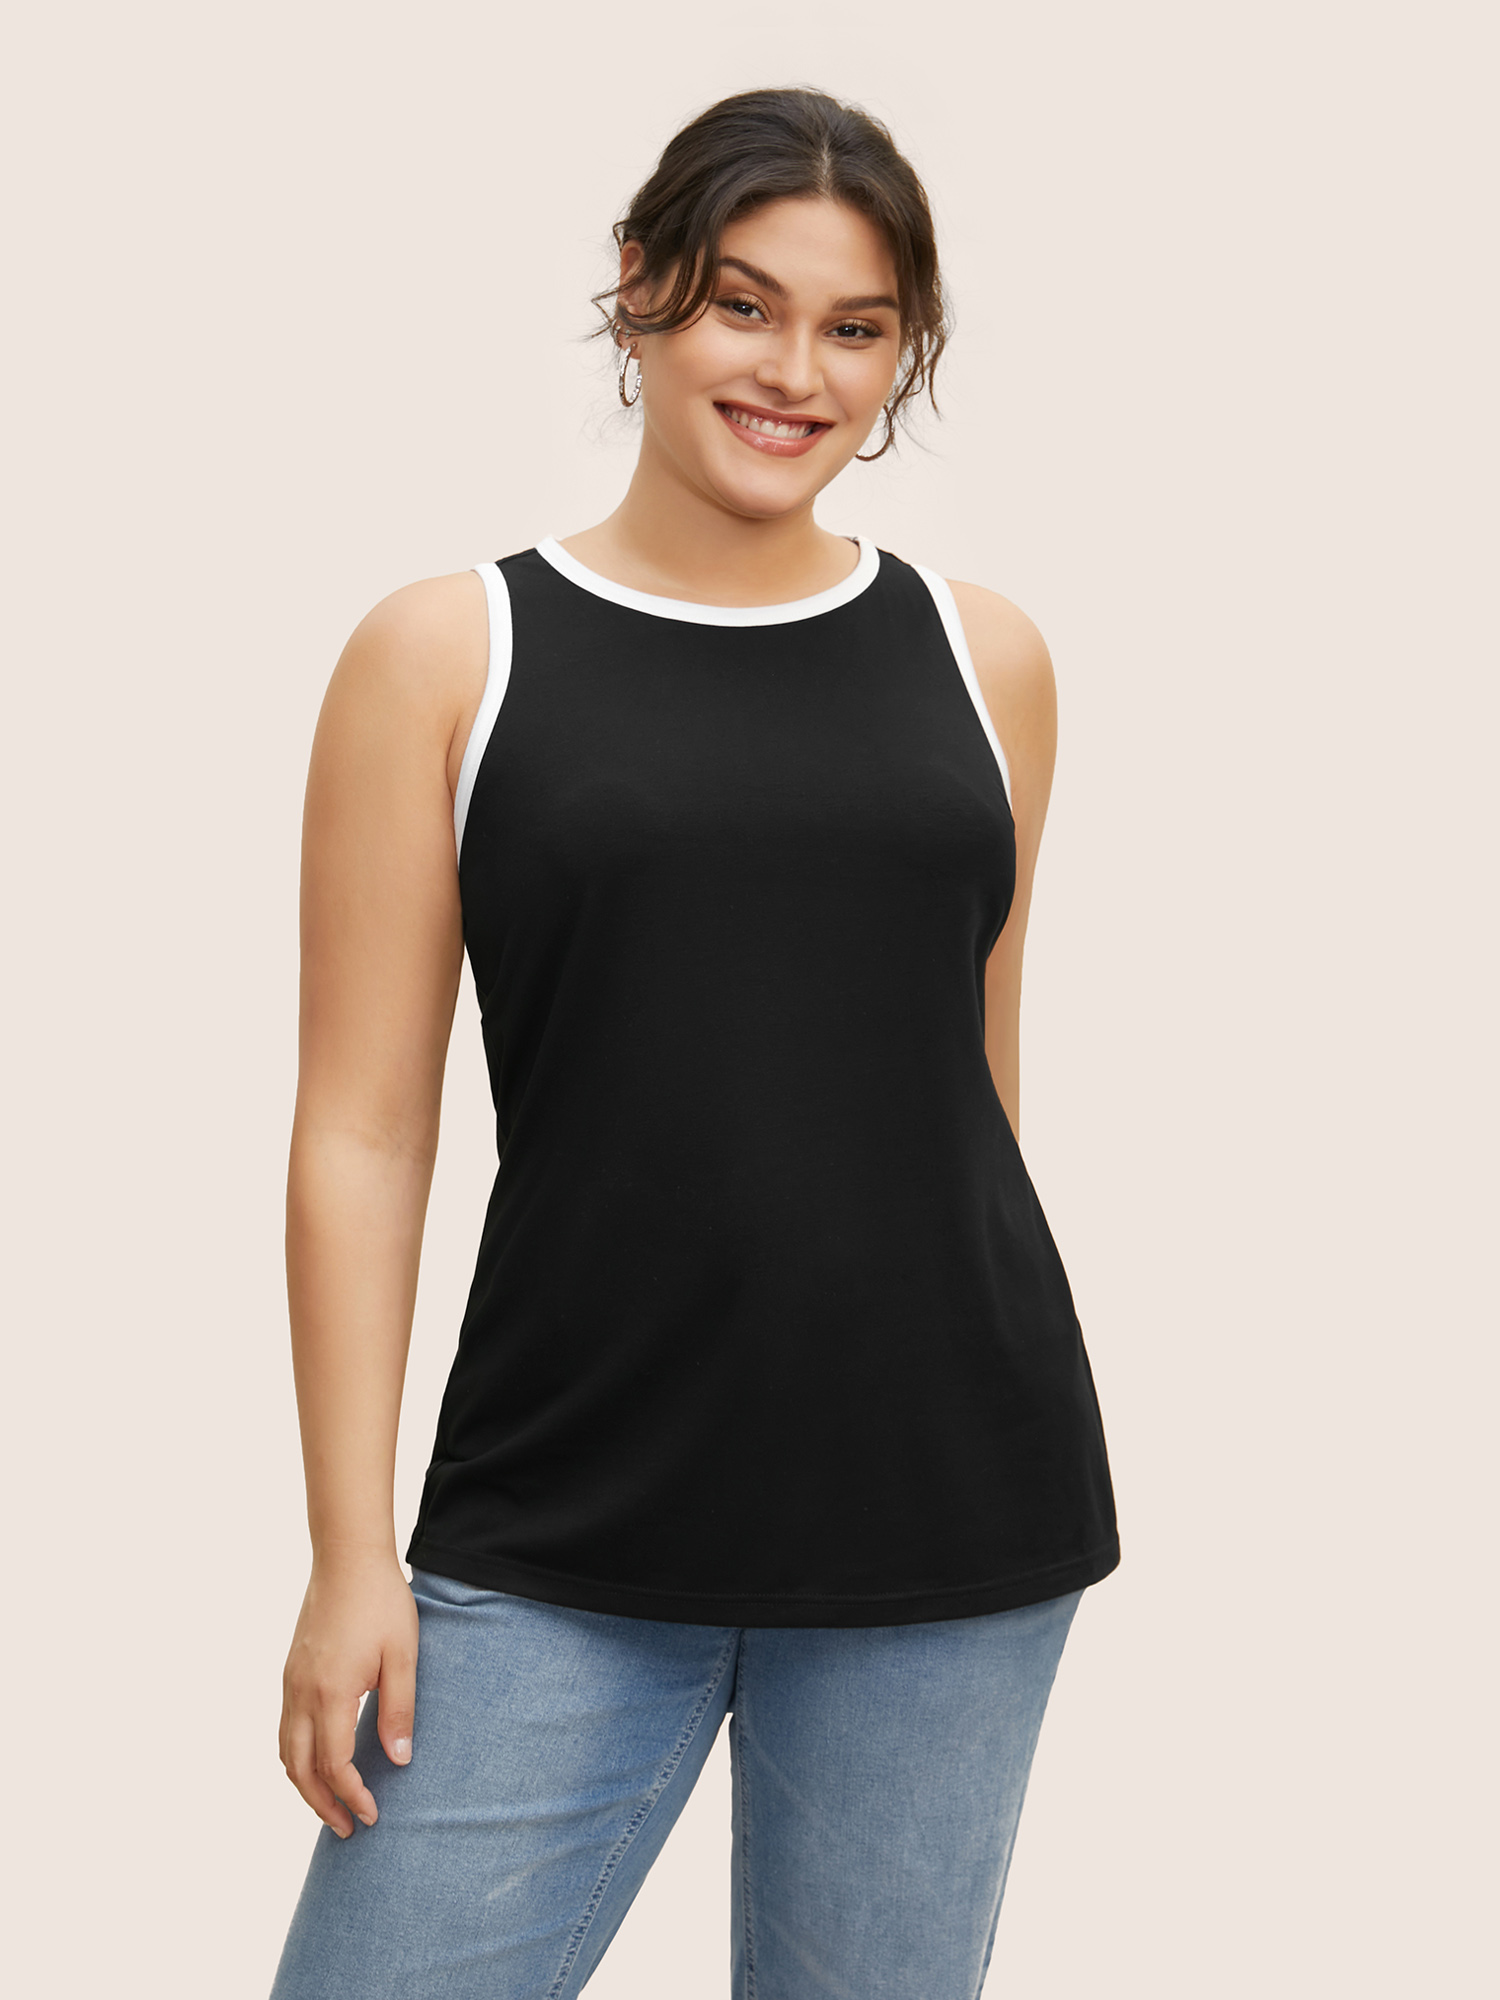 

Plus Size Round Neck Contrast Trim Tank Top Women Black Casual Contrast Round Neck Everyday Tank Tops Camis BloomChic